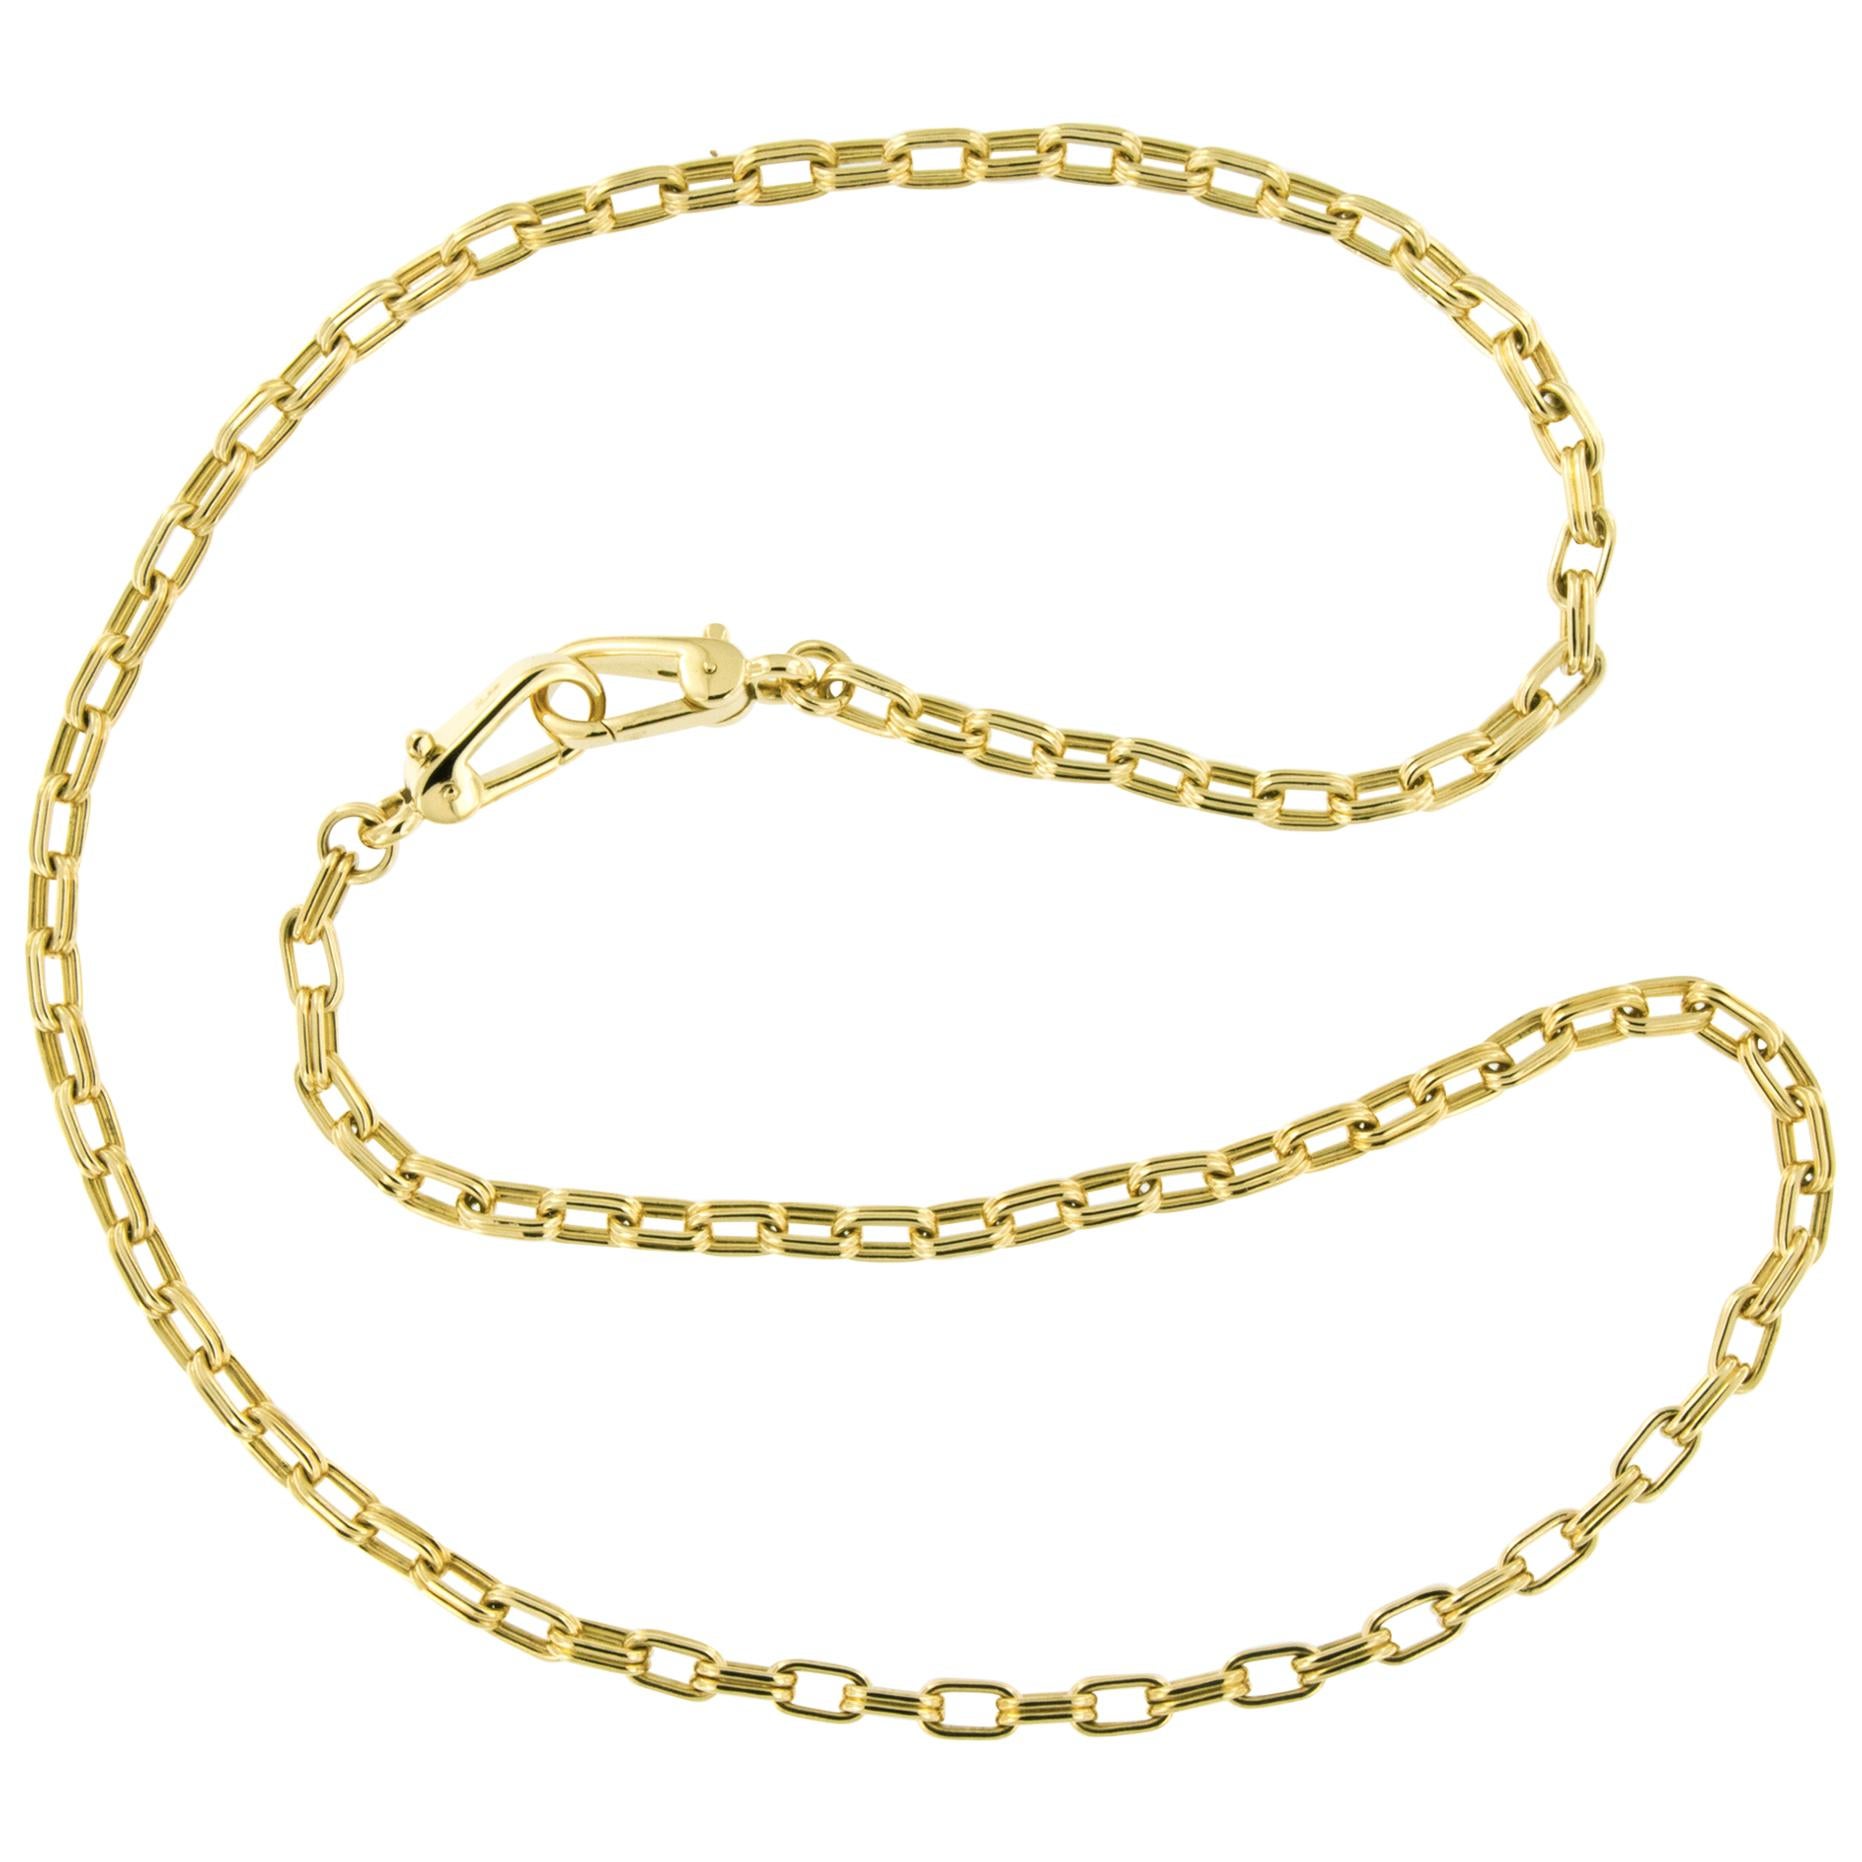 18 Karat Yellow Gold Long Chain Necklace Made in Italy by Designer Pomellato